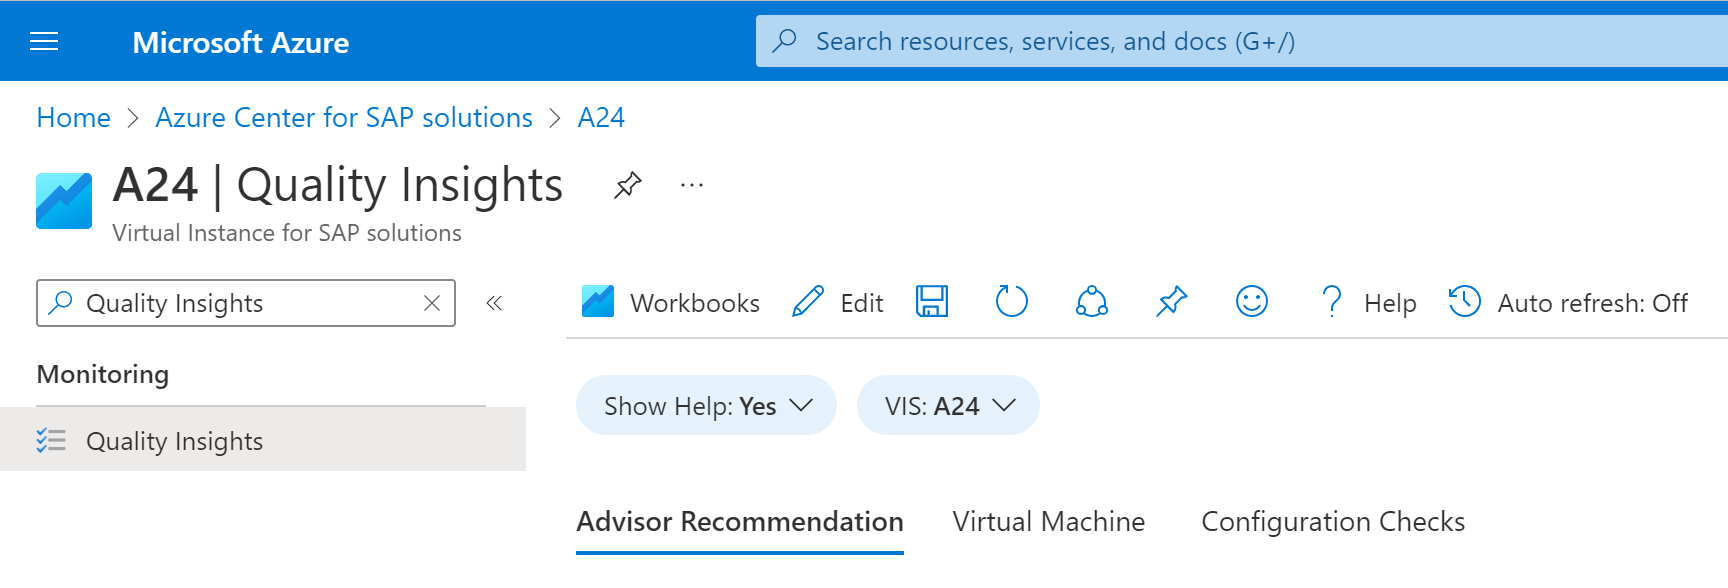 Screenshot of Azure portal, showing the Quality Insights workbook page selected in the sidebar menu for a virtual Instance for SAP solutions.